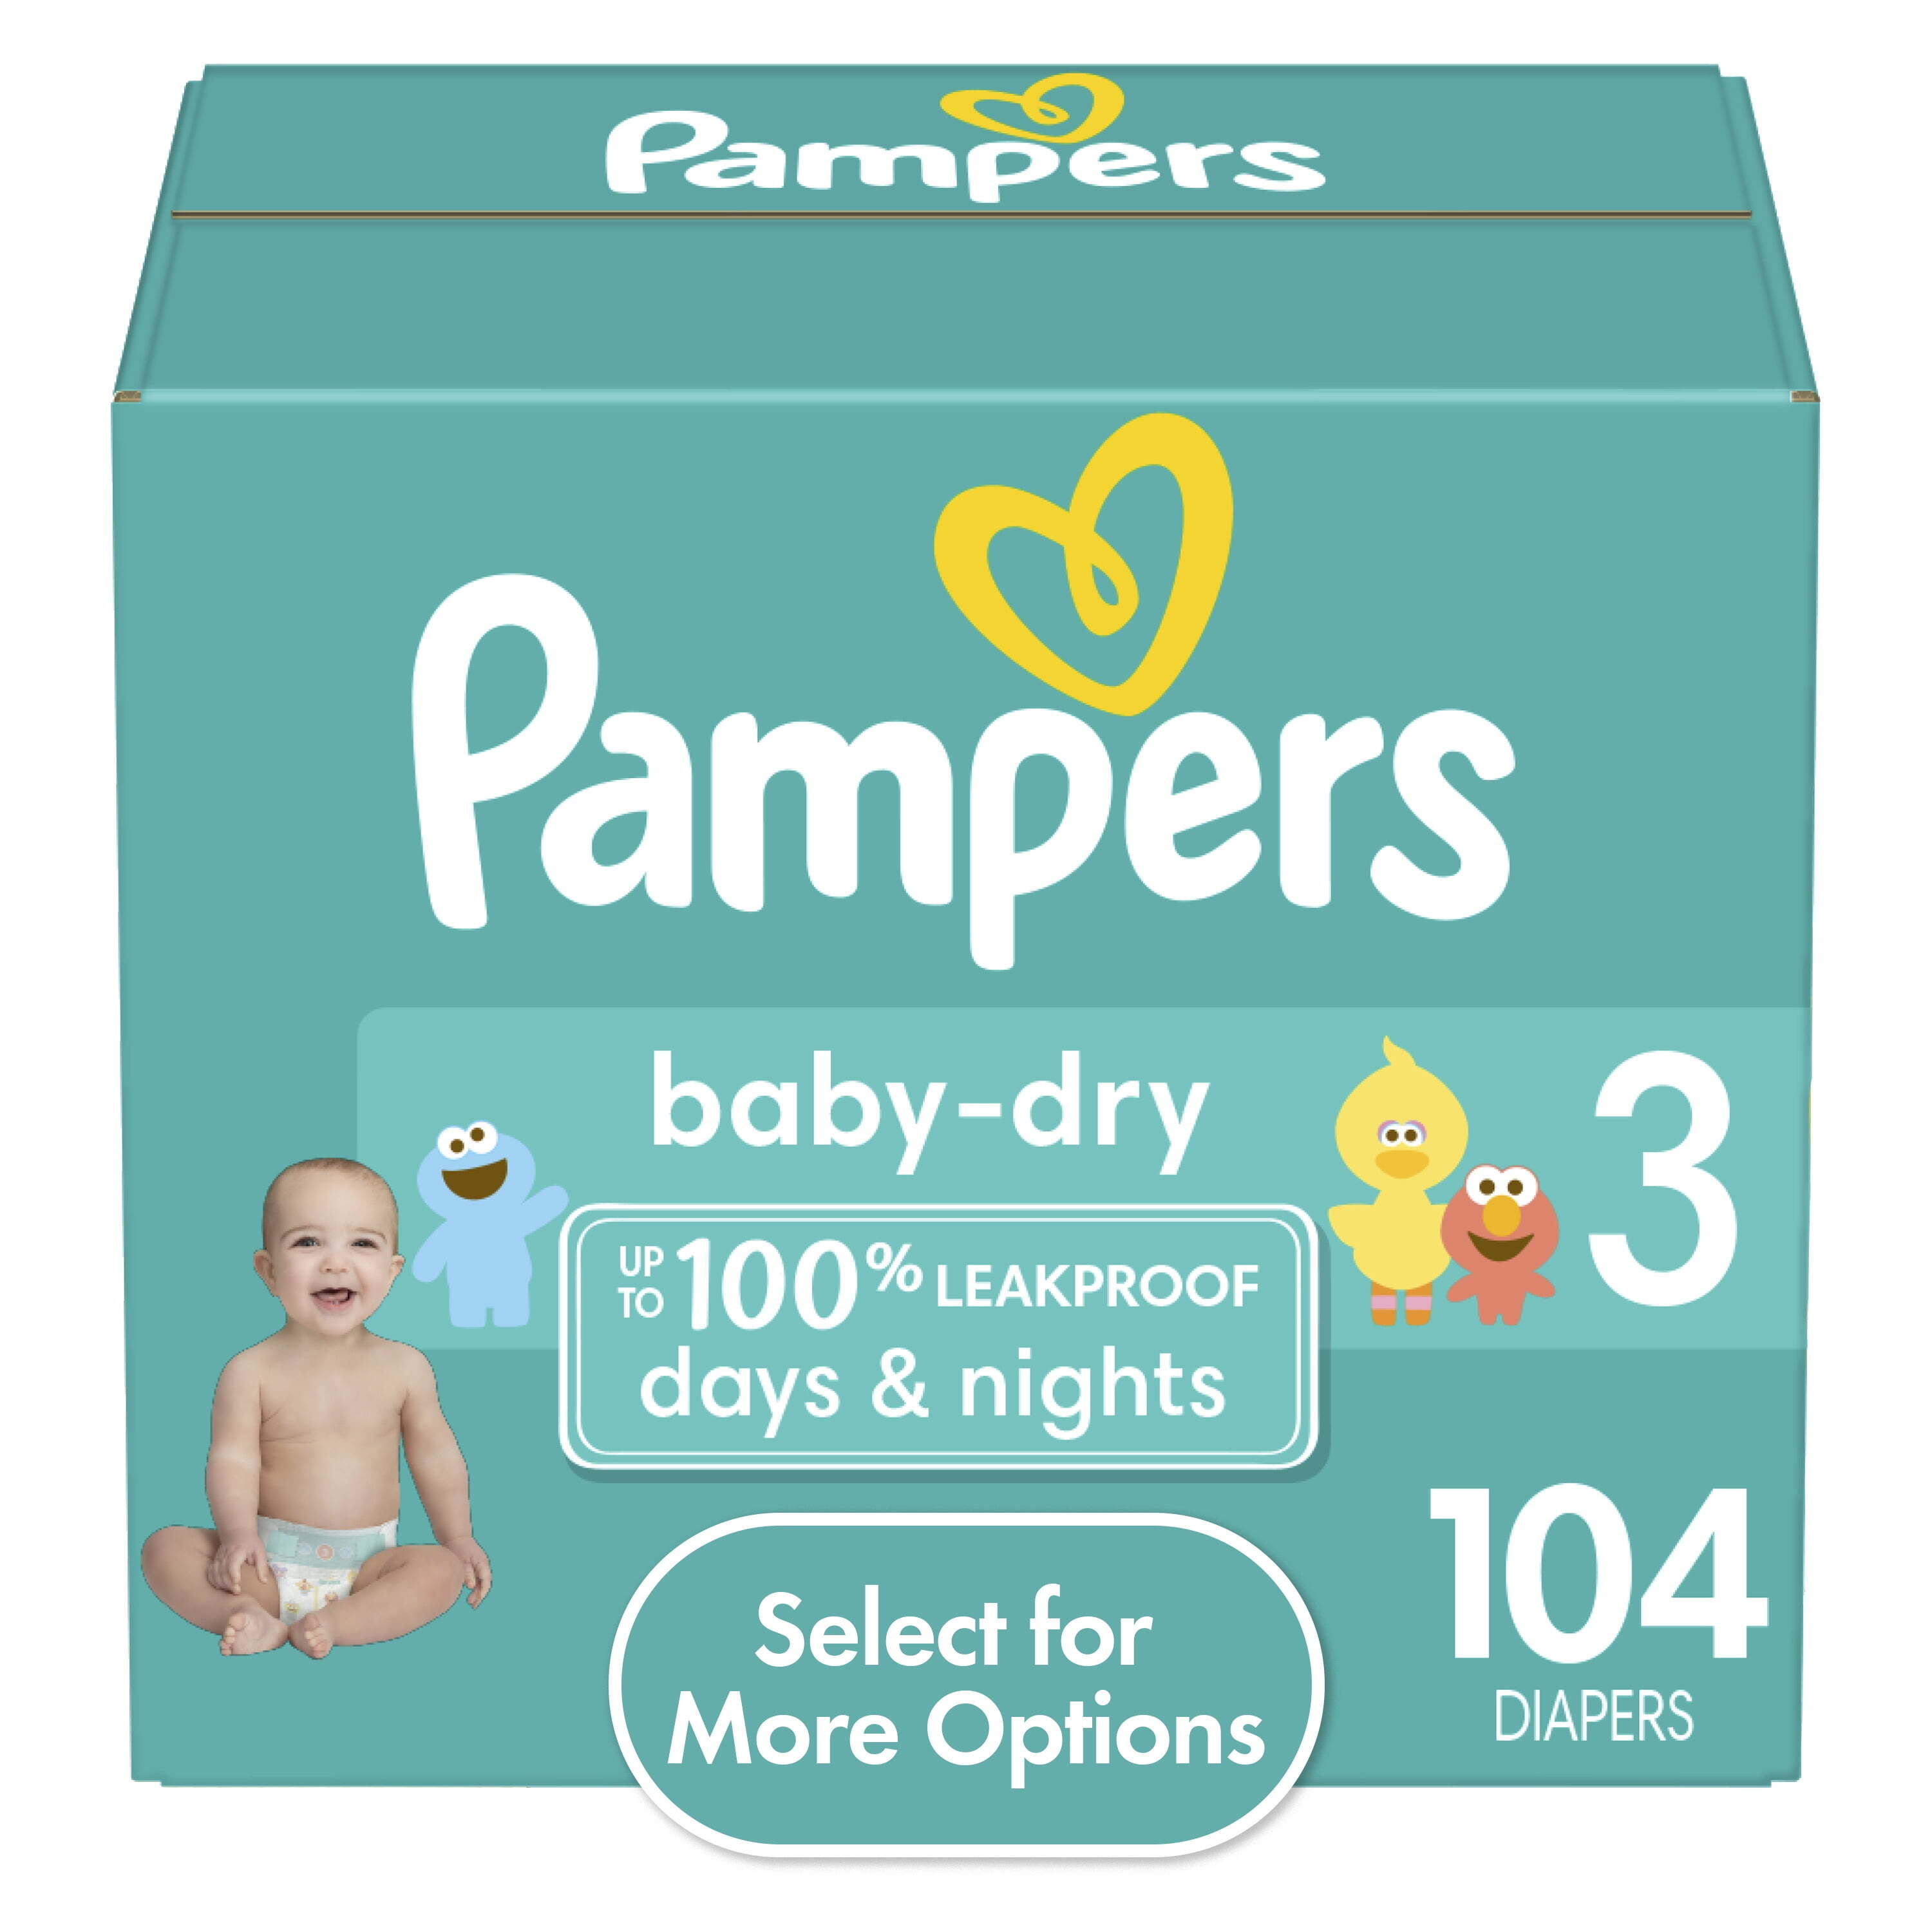 Pampers Baby Dry Diapers Size 3, 104 Count (Select for More Options) - image 1 of 13